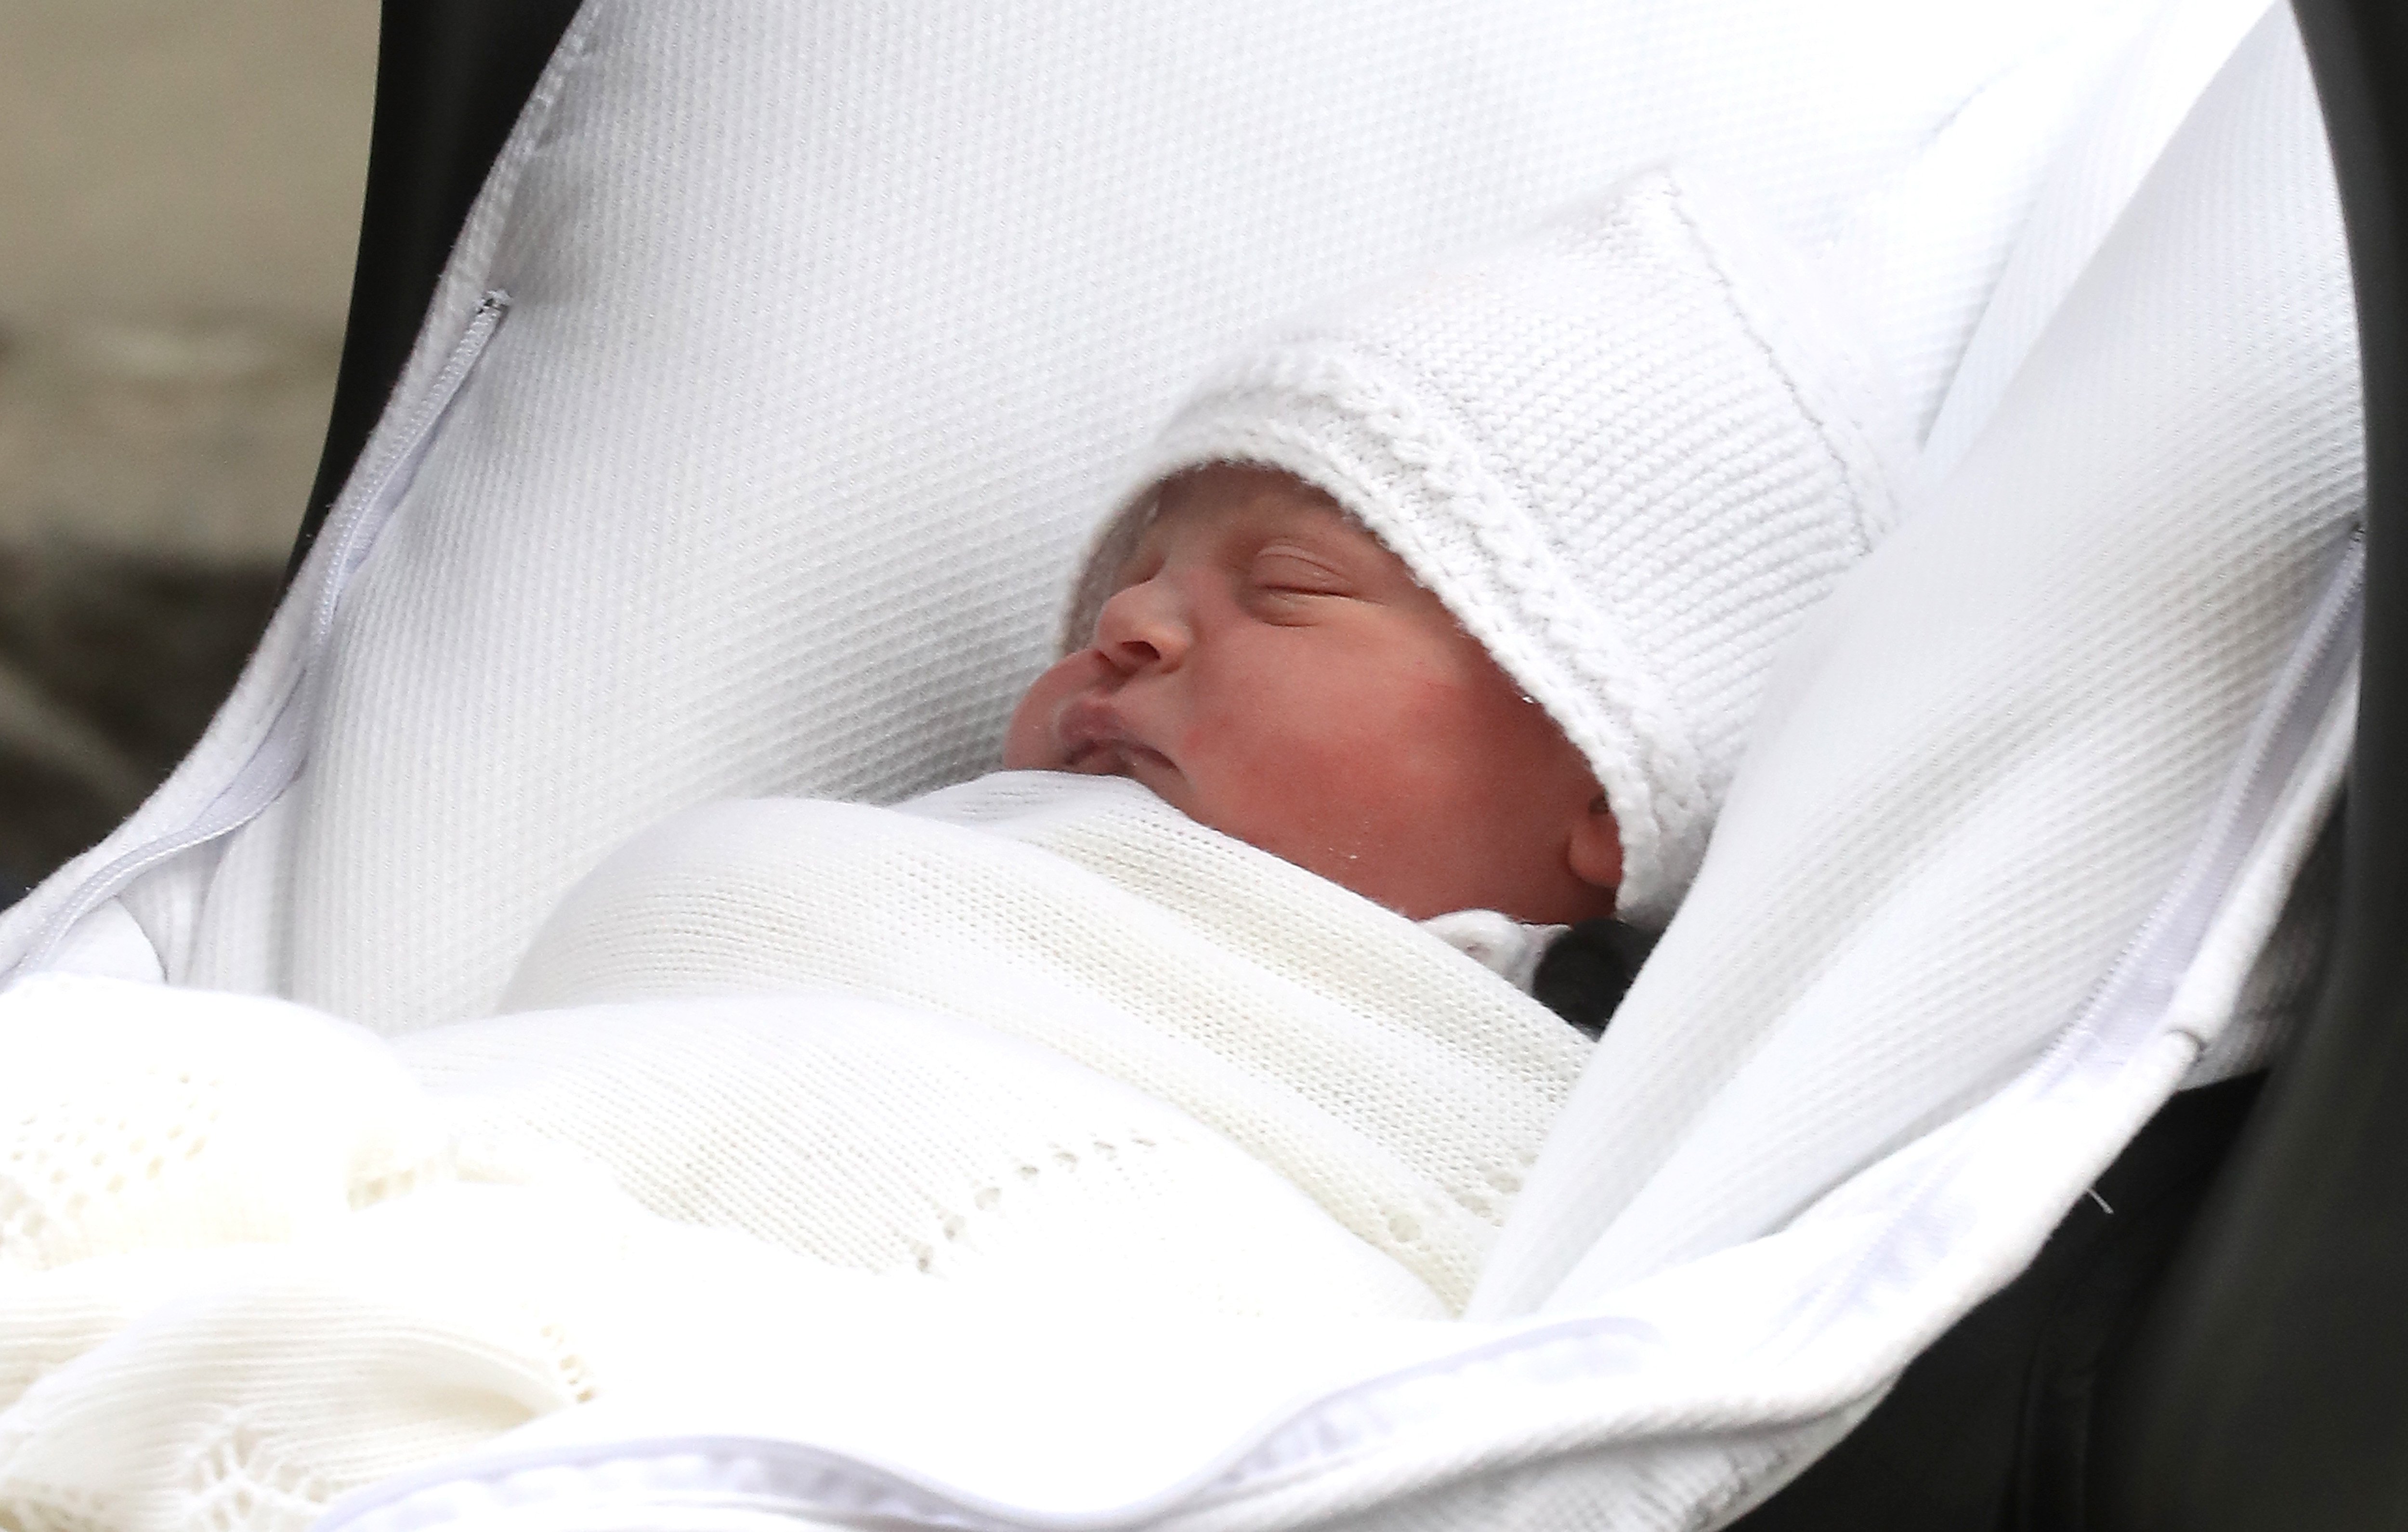 The newborn baby son of Prince William, Duke of Cambridge and Catherine, Duchess of Cambridge on April 23, 2018 in London. | Photo: Getty Images